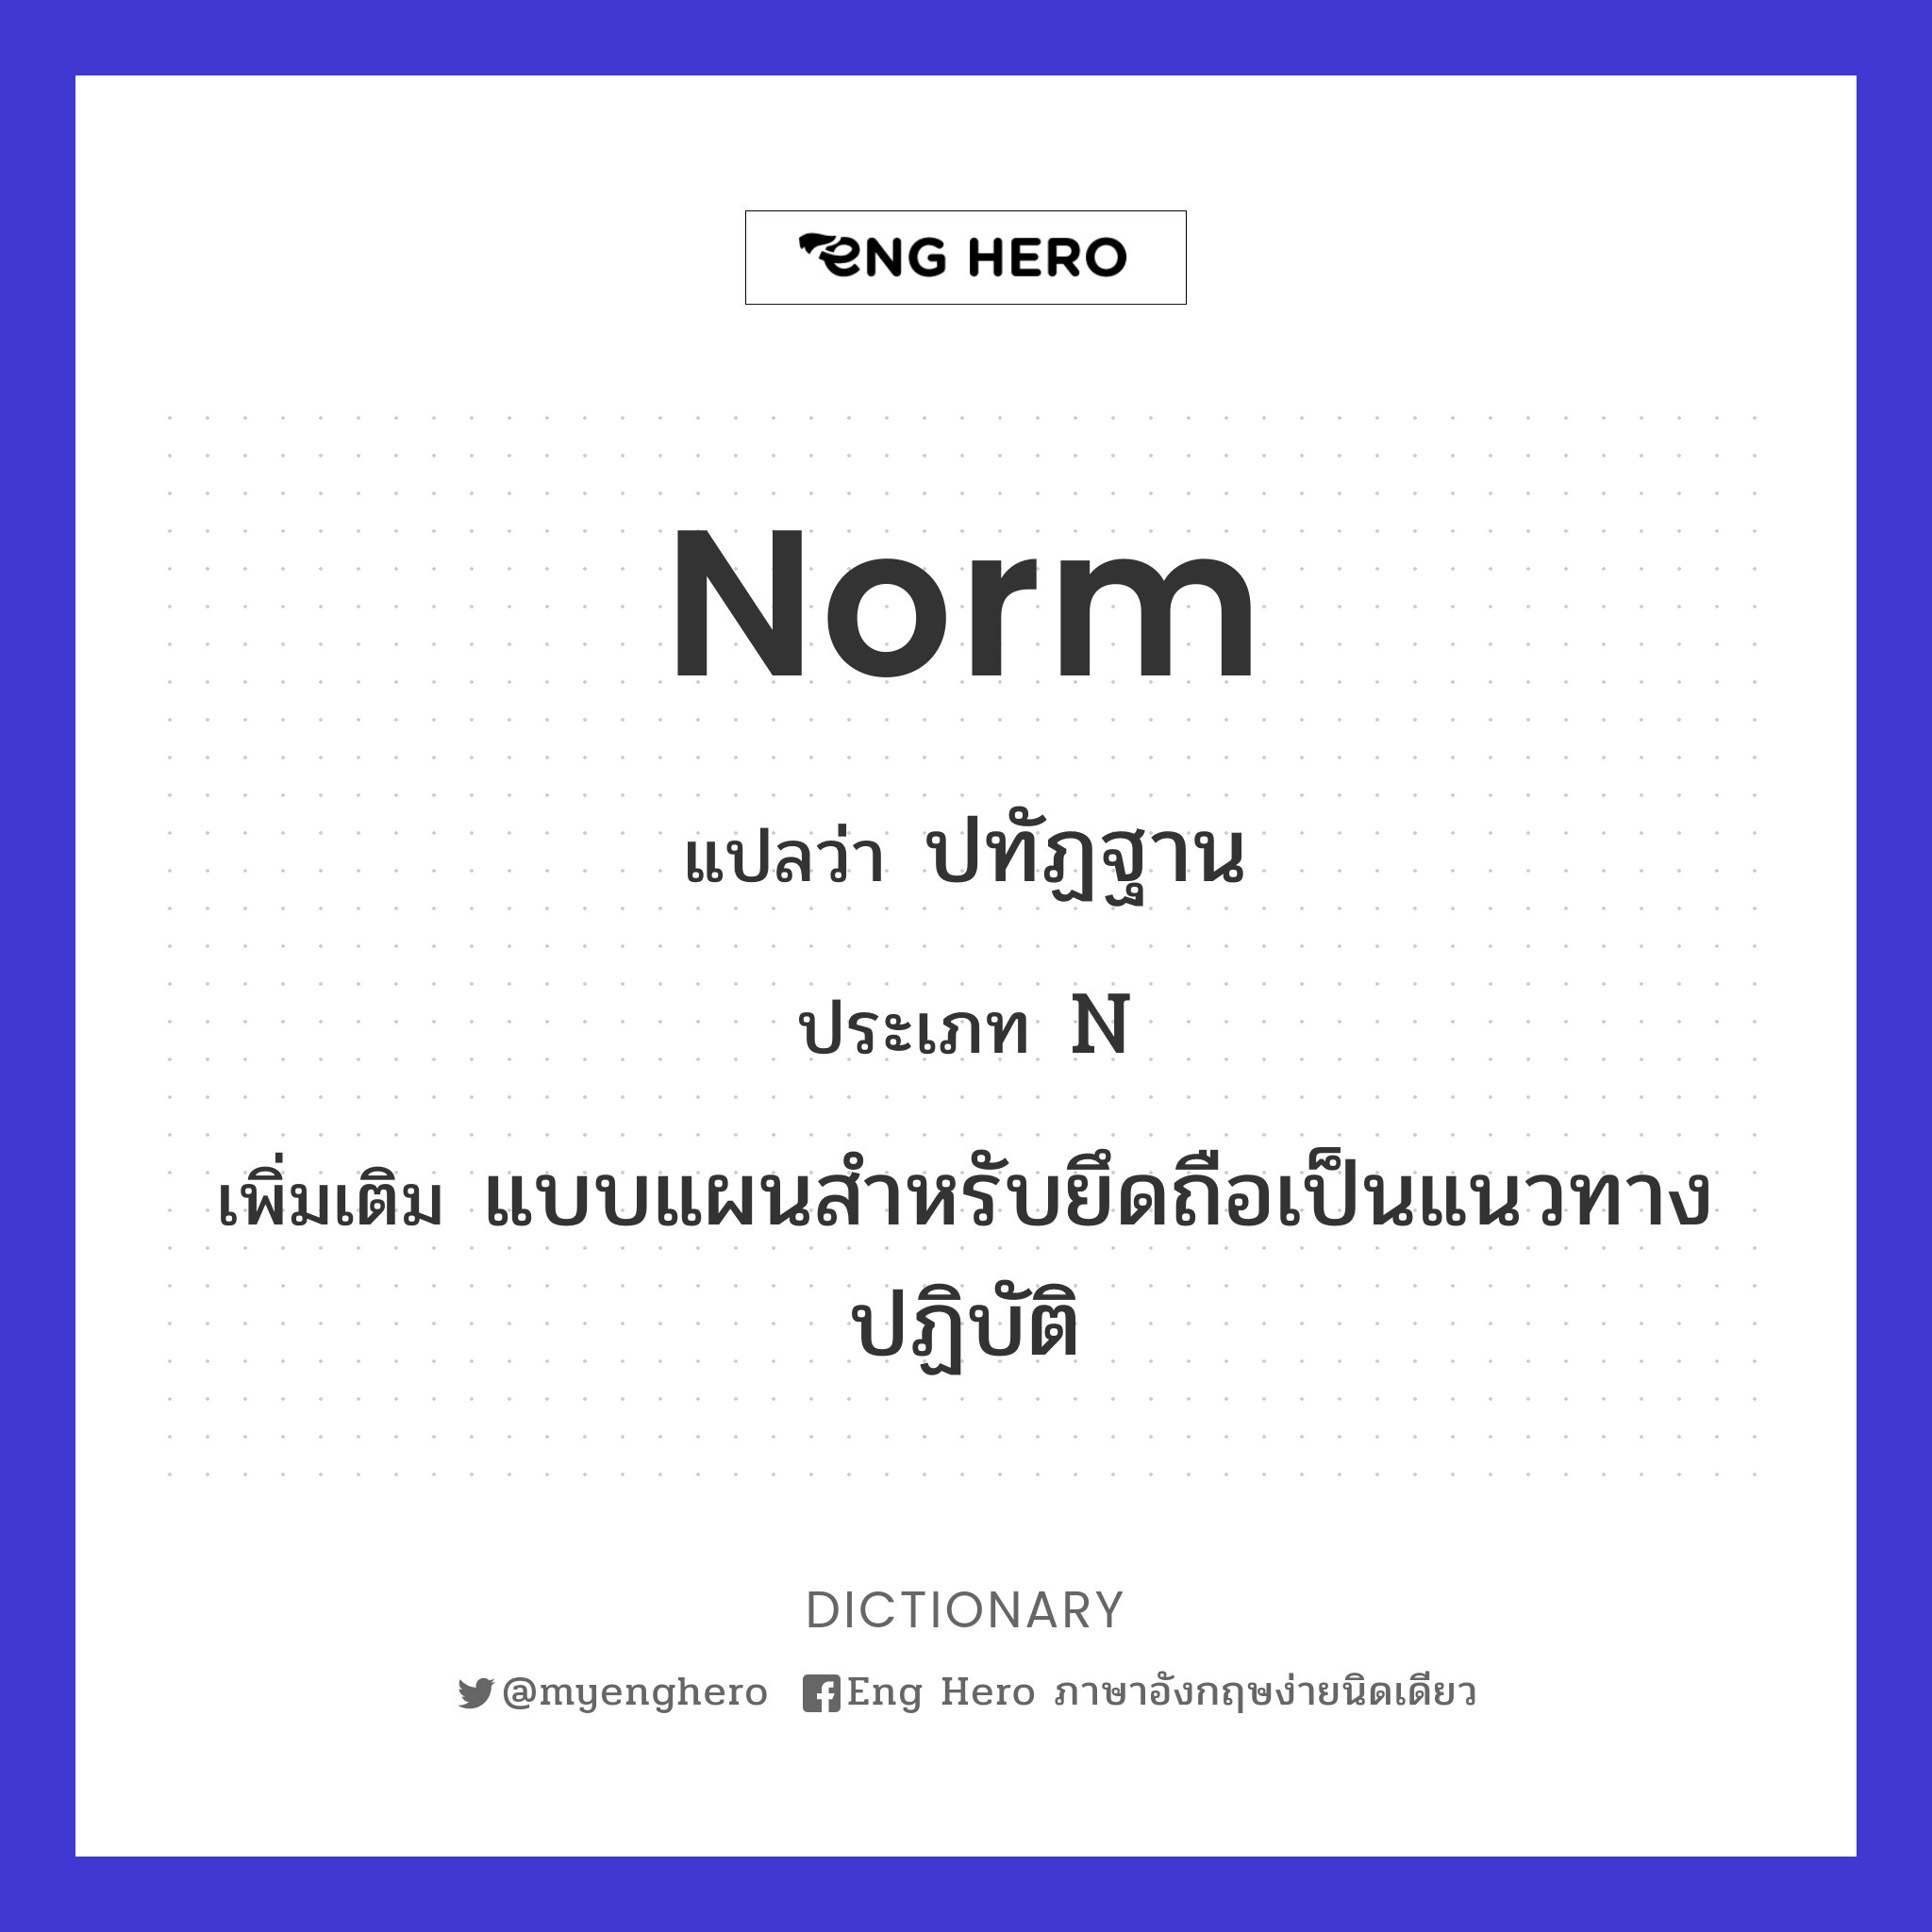 norm